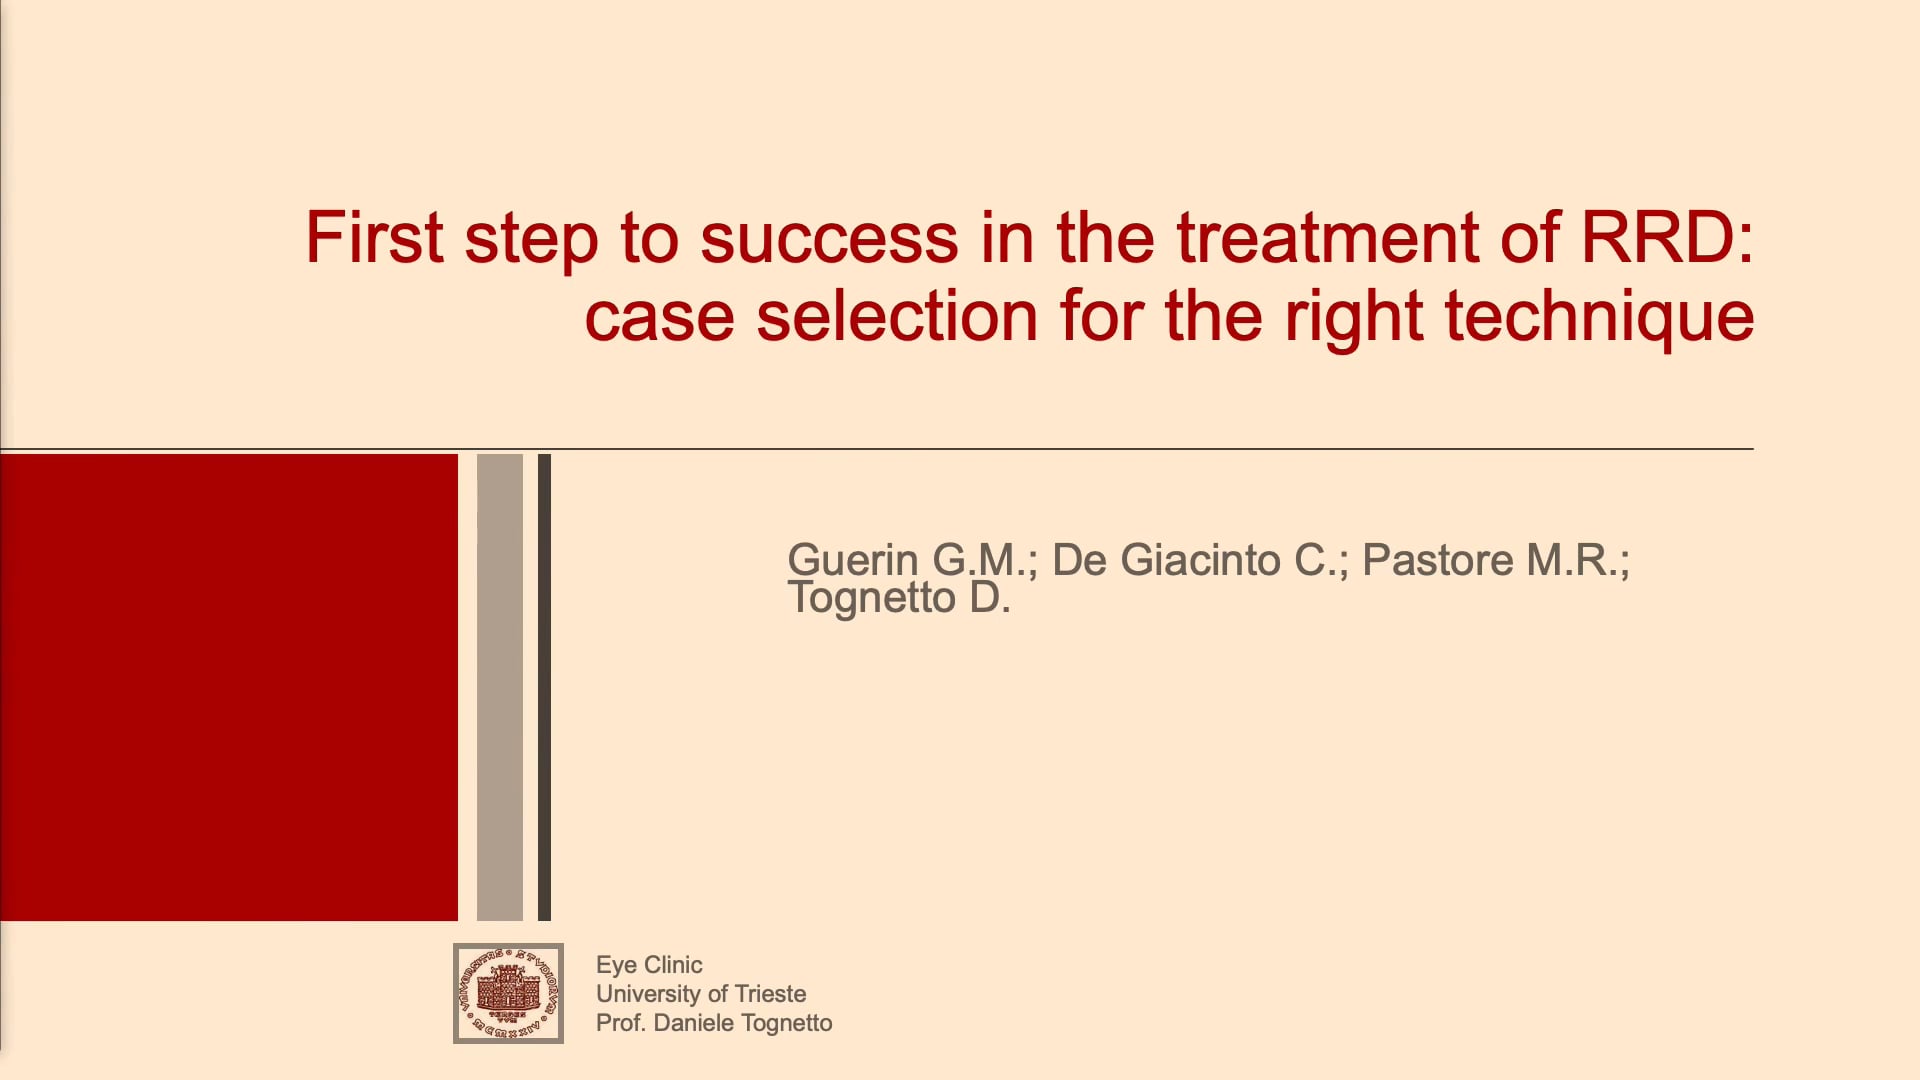 First Step To Success In The Treatment Of RRD: Case Selection For The Right Technique